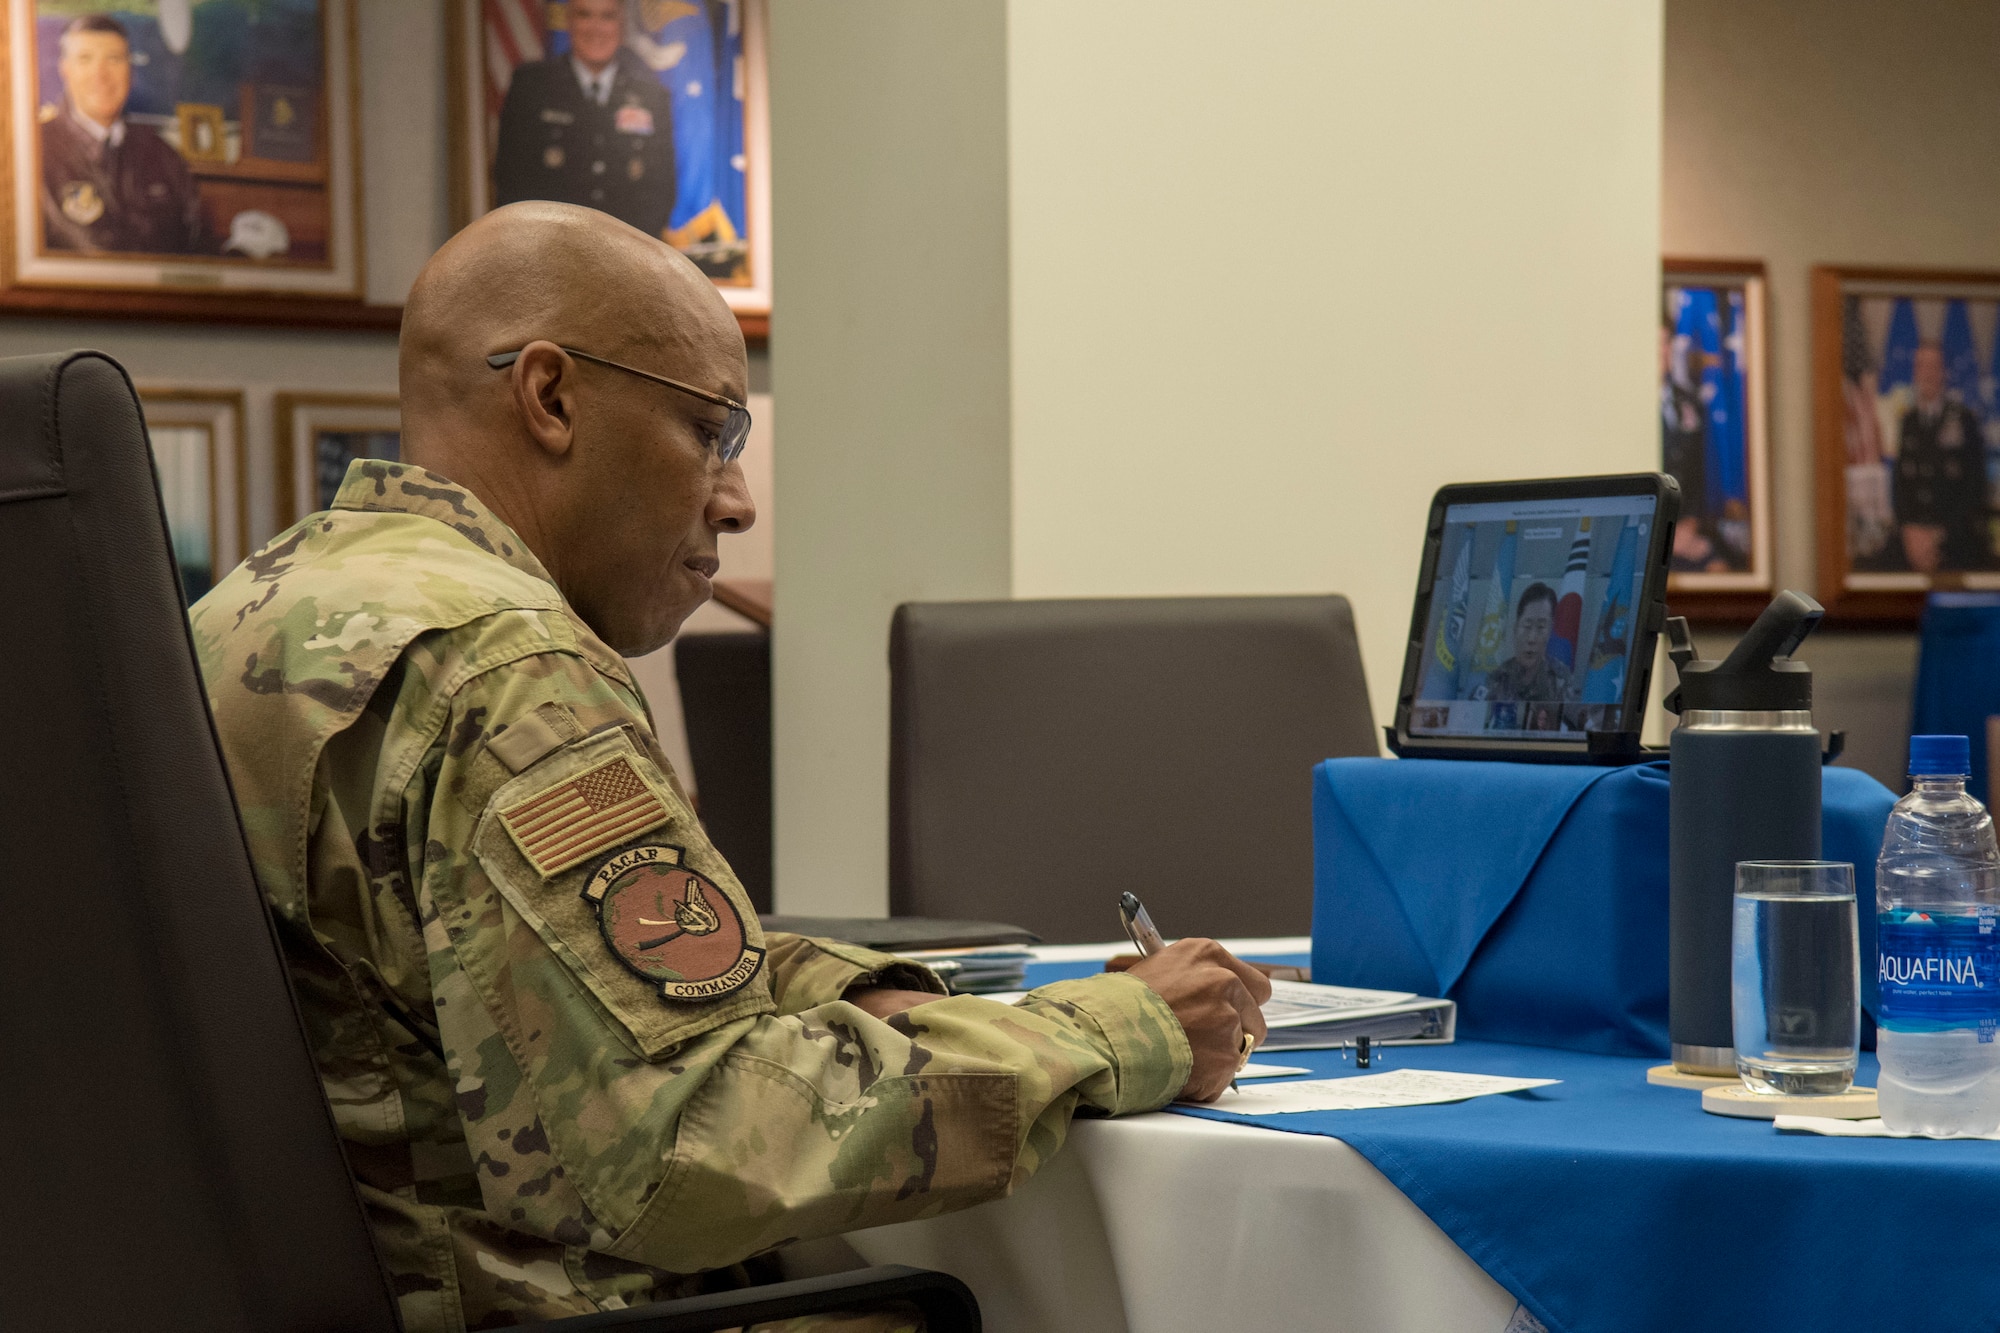 Gen. CQ Brown, Jr., Pacific Air Forces commander, participates in a virtual teleconference call with air chiefs at the Headquarters PACAF building on Joint Base Pearl Harbor-Hickam, Hawaii, April 29, 2020. The teleconference was intended to increase cooperation with allies and partners in support of a free and open Indo-Pacific. (U.S. Air Force photo by Staff Sgt. Mikaley Kline)